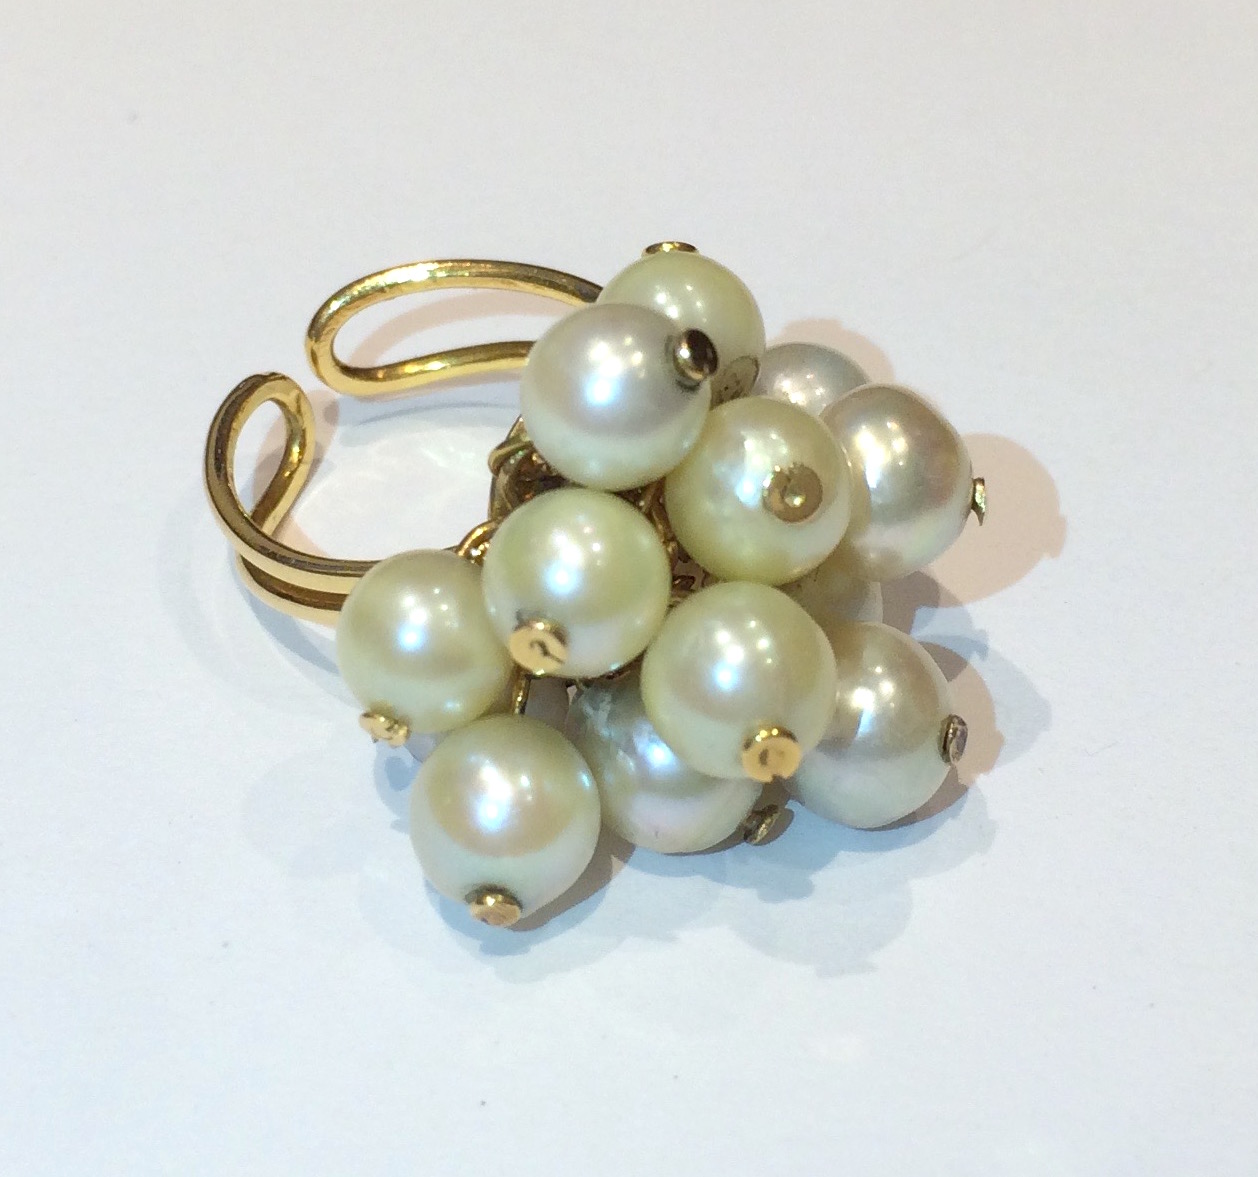 French “Pearl Pom Pom” ring, 18K gold mounted with 14 pearls, marked, c. 1950’s